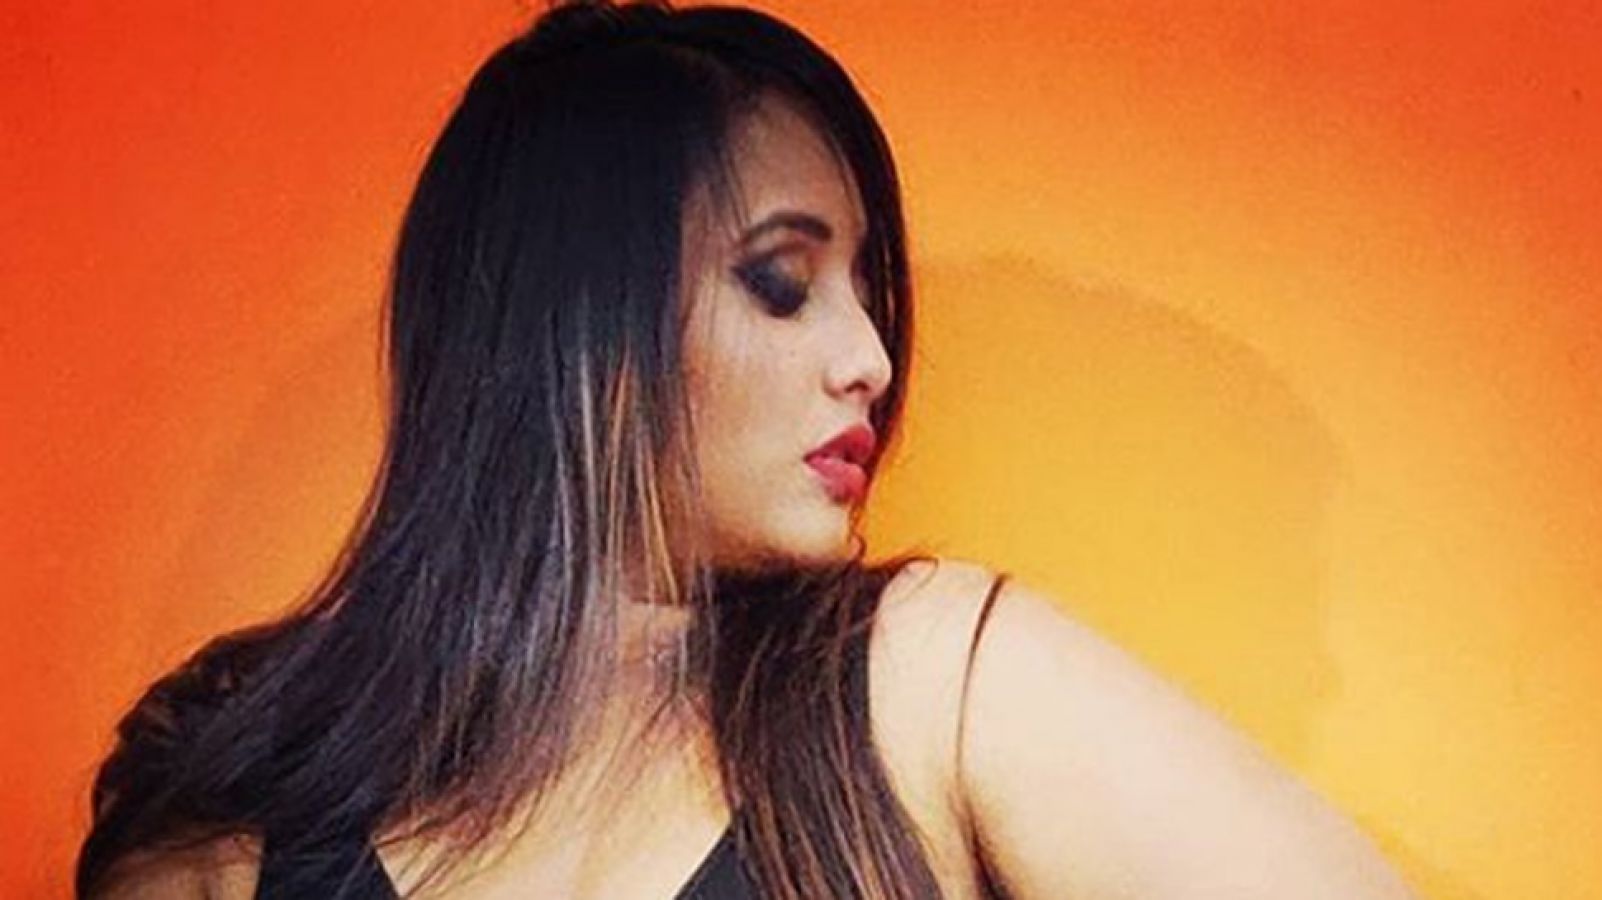 1602px x 900px - Rani Chatterjee spotted in hot dress, fans go crazy | News Track ...